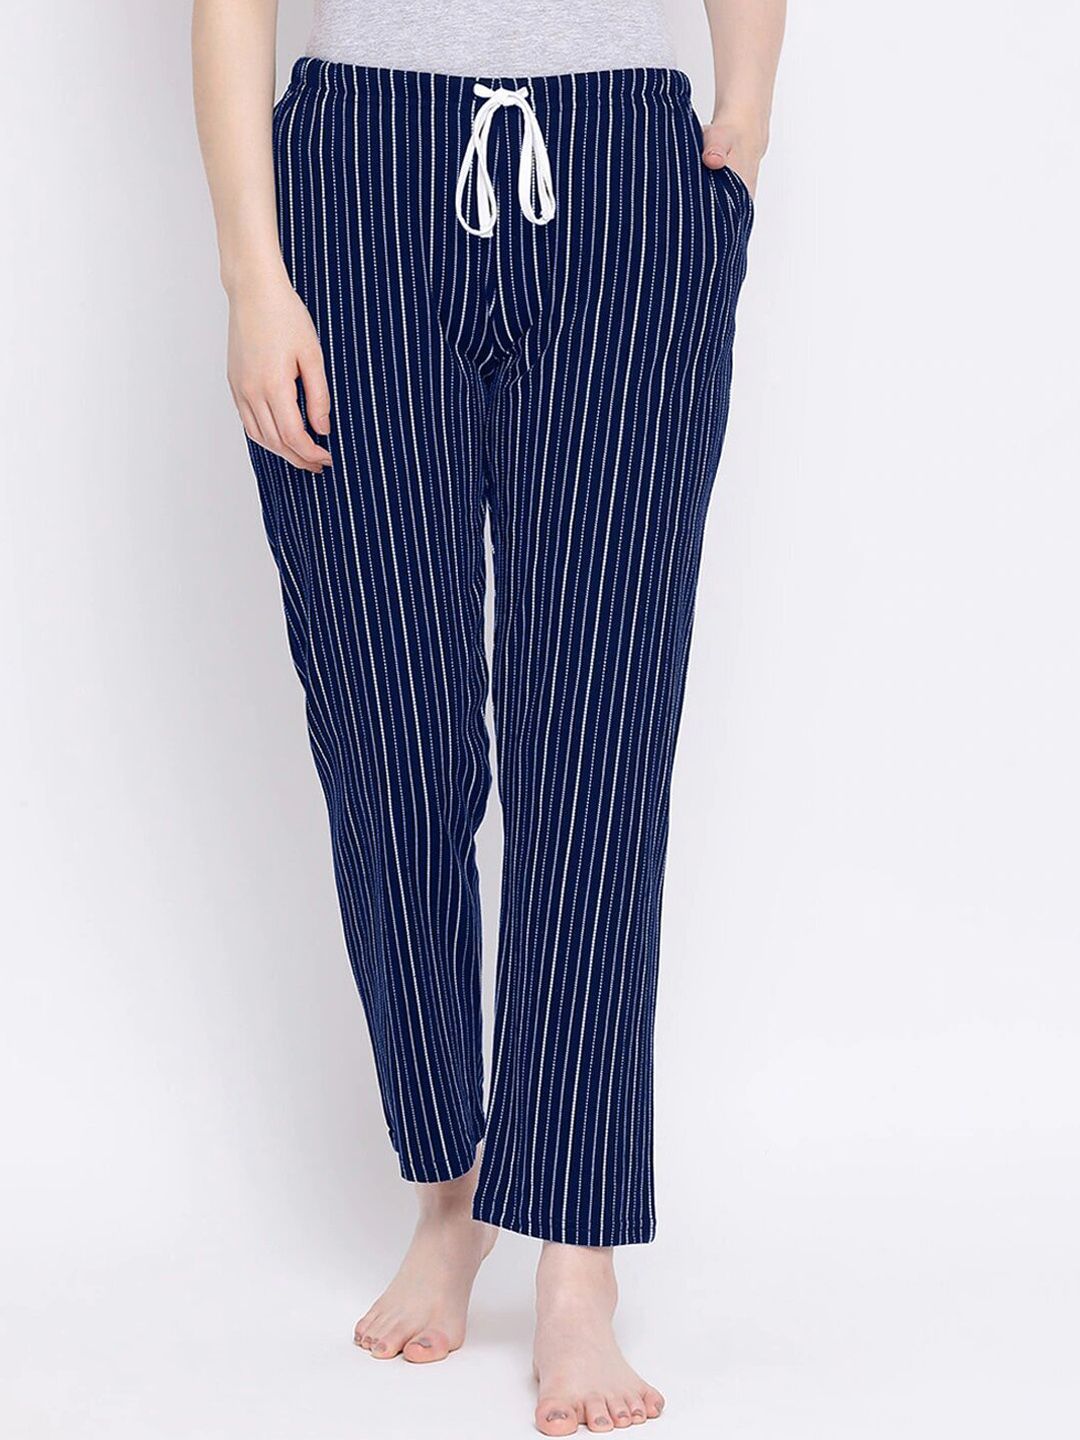 Kanvin Women Navy Blue Striped Cotton Lounge Pants Price in India